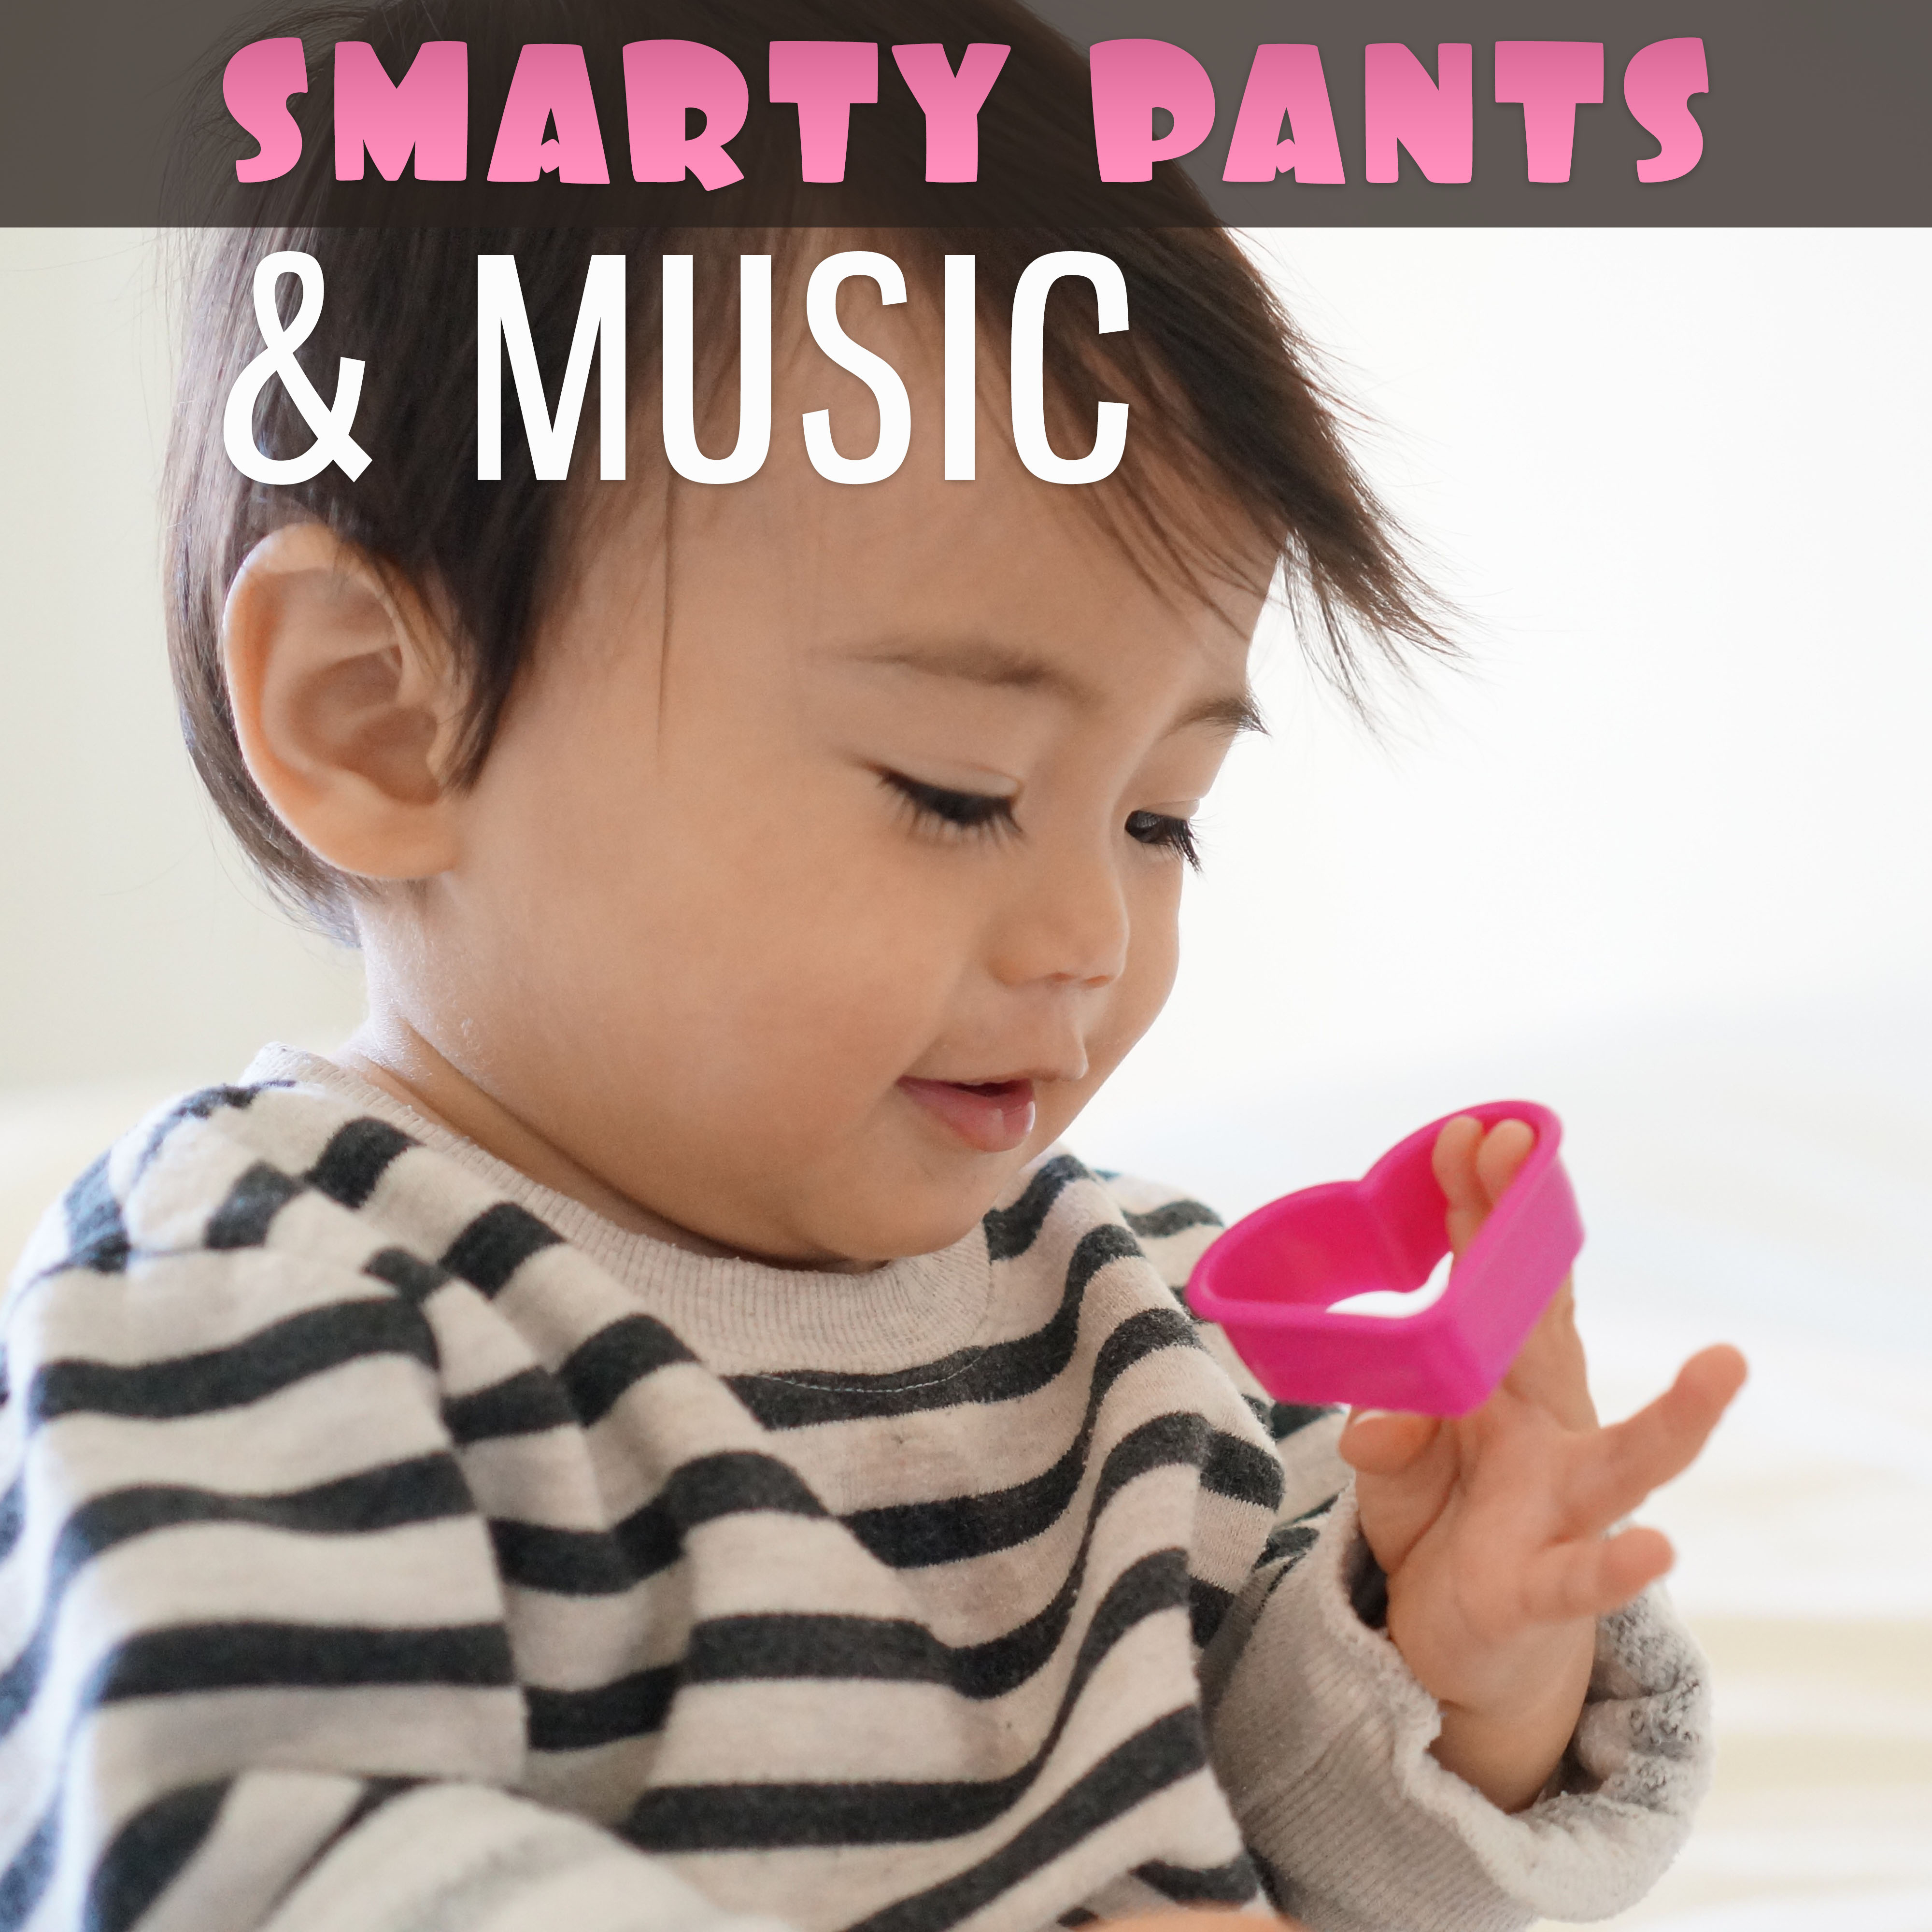 Smarty Pants  Music  Classical Songs for Kids, Music Fun, Smart Little Baby, Bach for Children